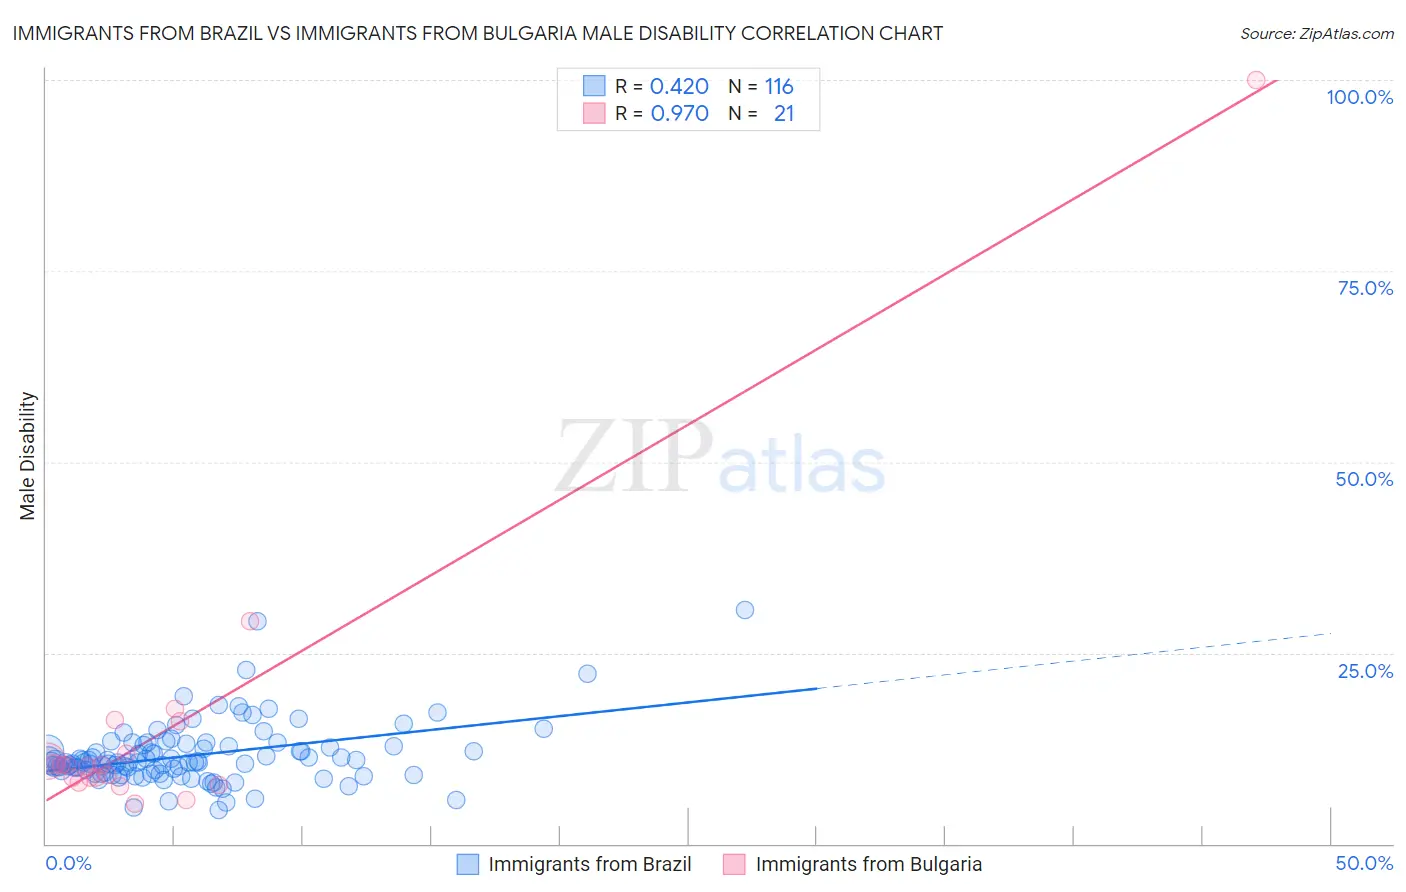 Immigrants from Brazil vs Immigrants from Bulgaria Male Disability